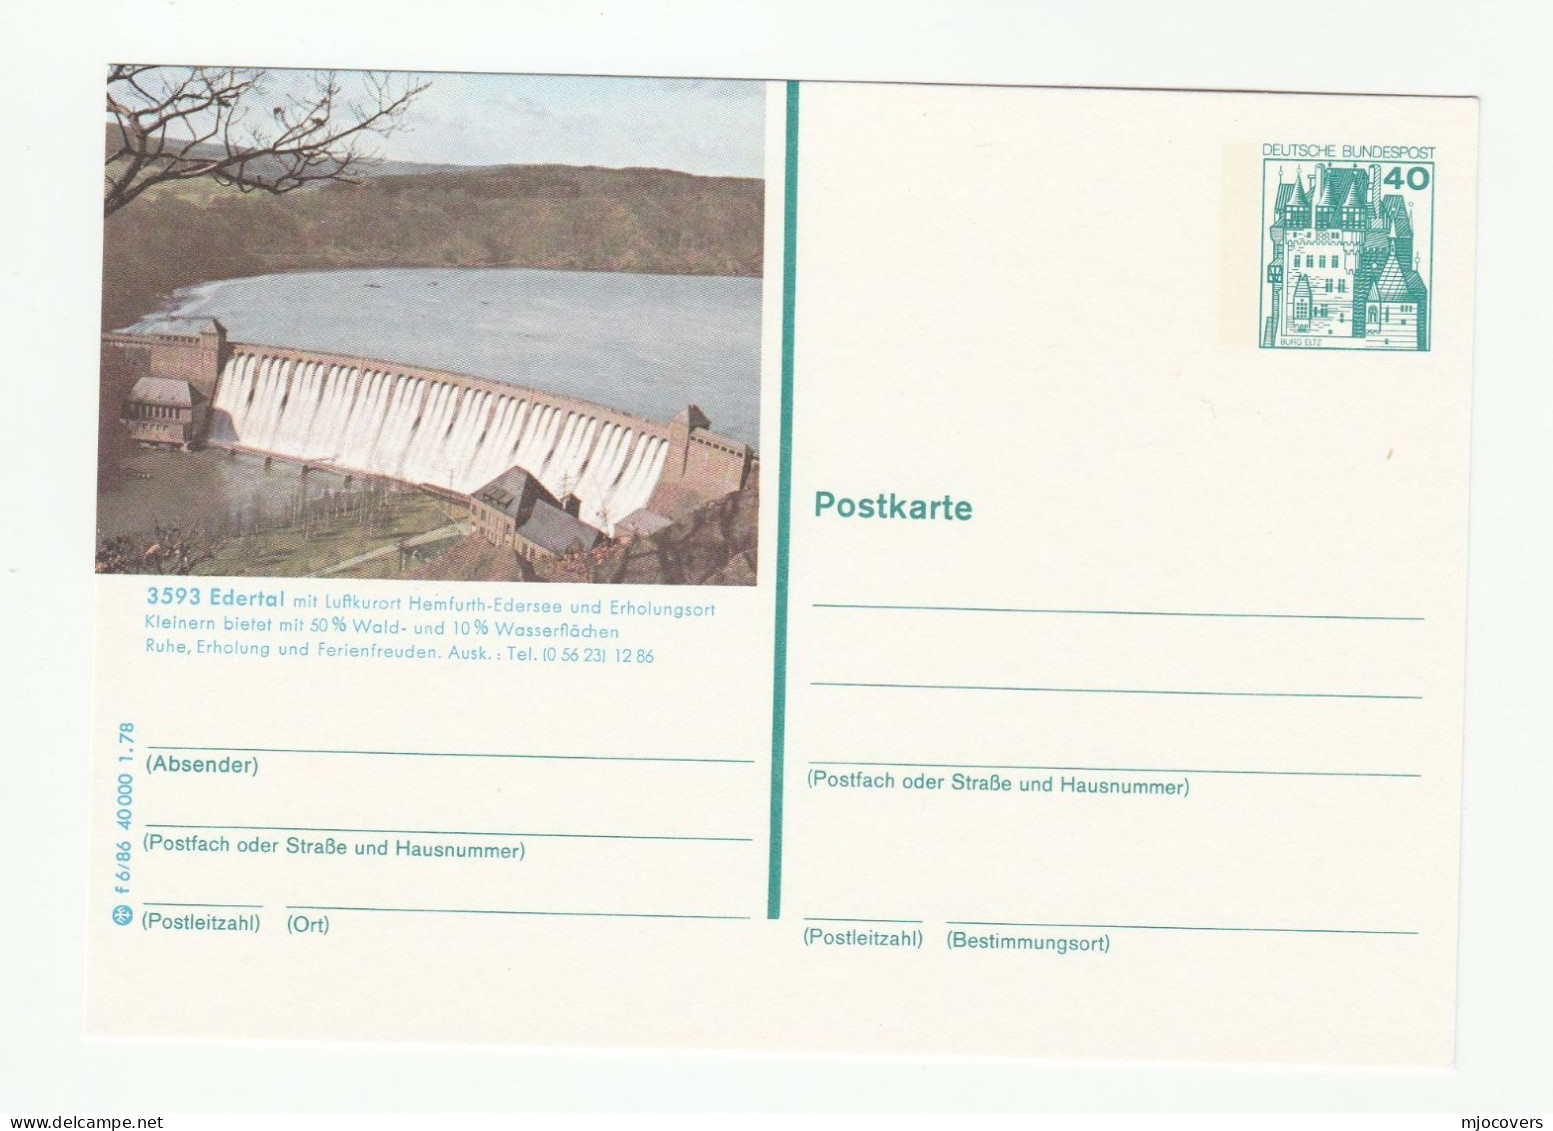 Edertal HYDROELECTRIC DAM Postal STATIONERY Card  1978 Germany Cover Electricity Energy Hydro Water - Eau